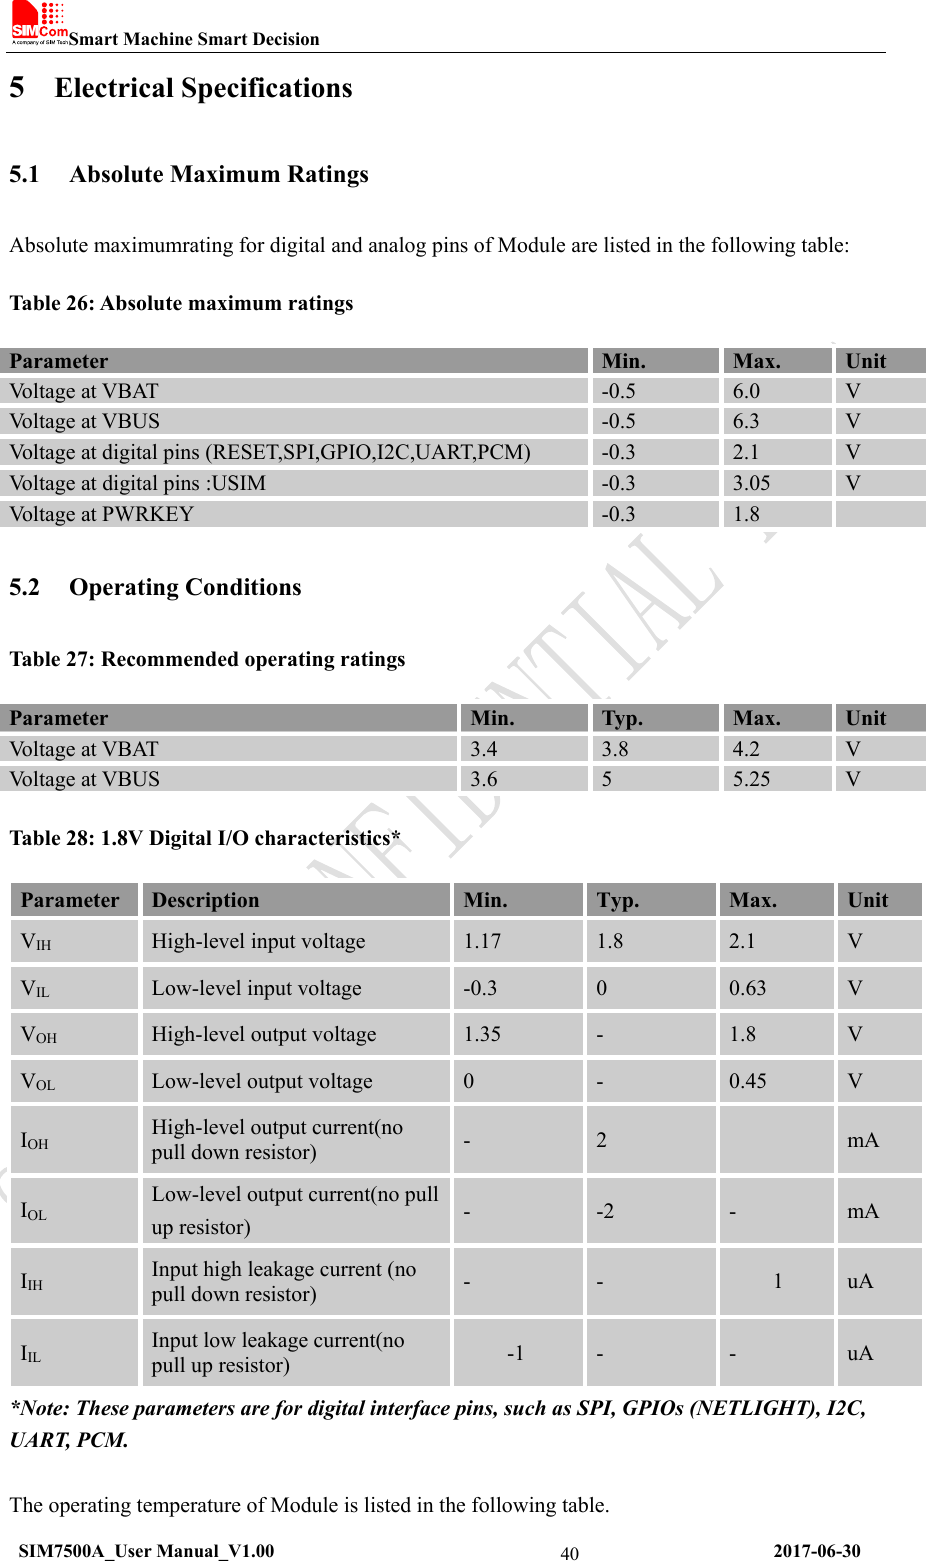 Smart Machine Smart Decision   SIM7500A_User Manual_V1.00                                                      2017-06-30 405 Electrical Specifications 5.1 Absolute Maximum Ratings Absolute maximumrating for digital and analog pins of Module are listed in the following table: Table 26: Absolute maximum ratings Parameter  Min.  Max.  Unit Voltage at VBAT  -0.5  6.0  V Voltage at VBUS  -0.5  6.3  V Voltage at digital pins (RESET,SPI,GPIO,I2C,UART,PCM)  -0.3  2.1  V Voltage at digital pins :USIM  -0.3  3.05  V Voltage at PWRKEY  -0.3  1.8   5.2 Operating Conditions Table 27: Recommended operating ratings Parameter  Min.  Typ.  Max.  Unit Voltage at VBAT  3.4  3.8  4.2  V Voltage at VBUS  3.6  5  5.25  V Table 28: 1.8V Digital I/O characteristics* Parameter  Description  Min.  Typ.  Max.  Unit VIH High-level input voltage  1.17  1.8  2.1  V VIL Low-level input voltage  -0.3  0  0.63  V VOH High-level output voltage  1.35  -  1.8  V VOL Low-level output voltage  0  -  0.45  V IOH High-level output current(no pull down resistor)  -  2   mA IOL Low-level output current(no pull up resistor)  -  -2  -  mA IIH Input high leakage current (no pull down resistor)  -  -  1  uA IIL Input low leakage current(no pull up resistor)  -1  -  -  uA *Note: These parameters are for digital interface pins, such as SPI, GPIOs (NETLIGHT), I2C, UART, PCM.    The operating temperature of Module is listed in the following table. 